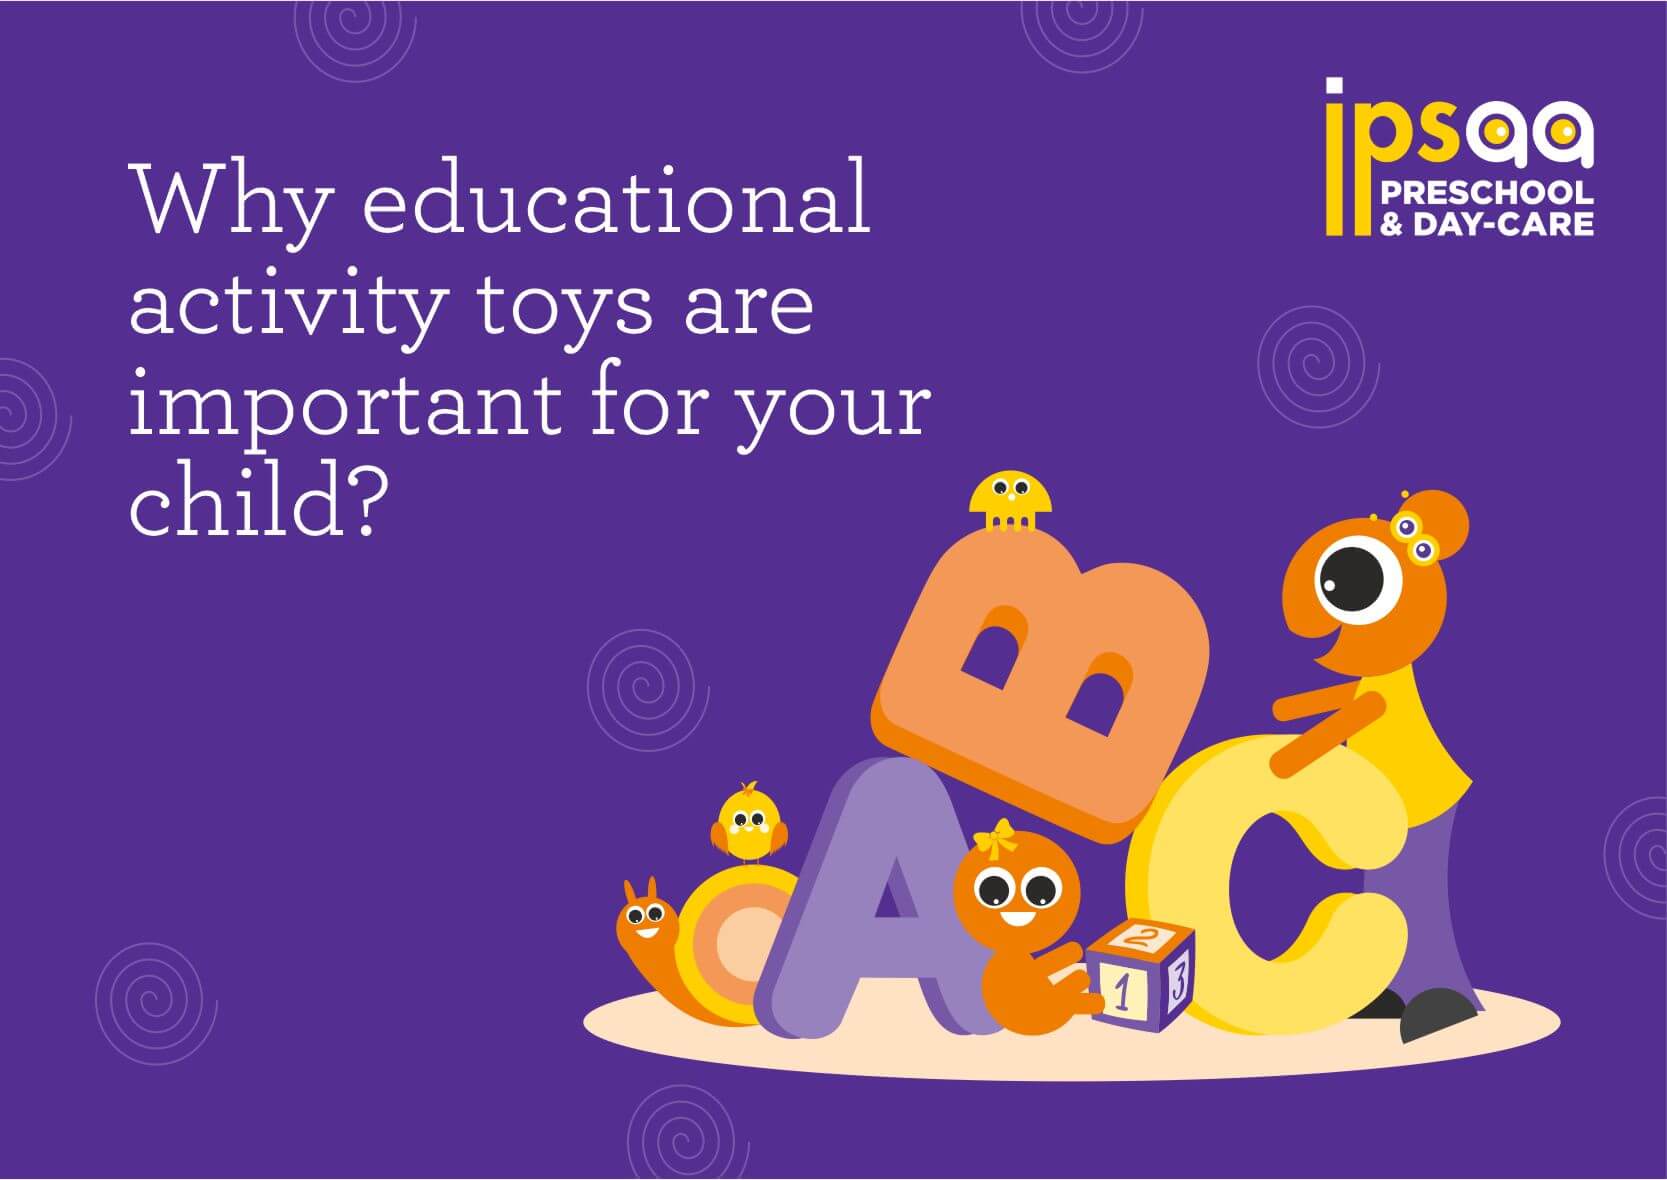 Why educational activity toys are important for your child?